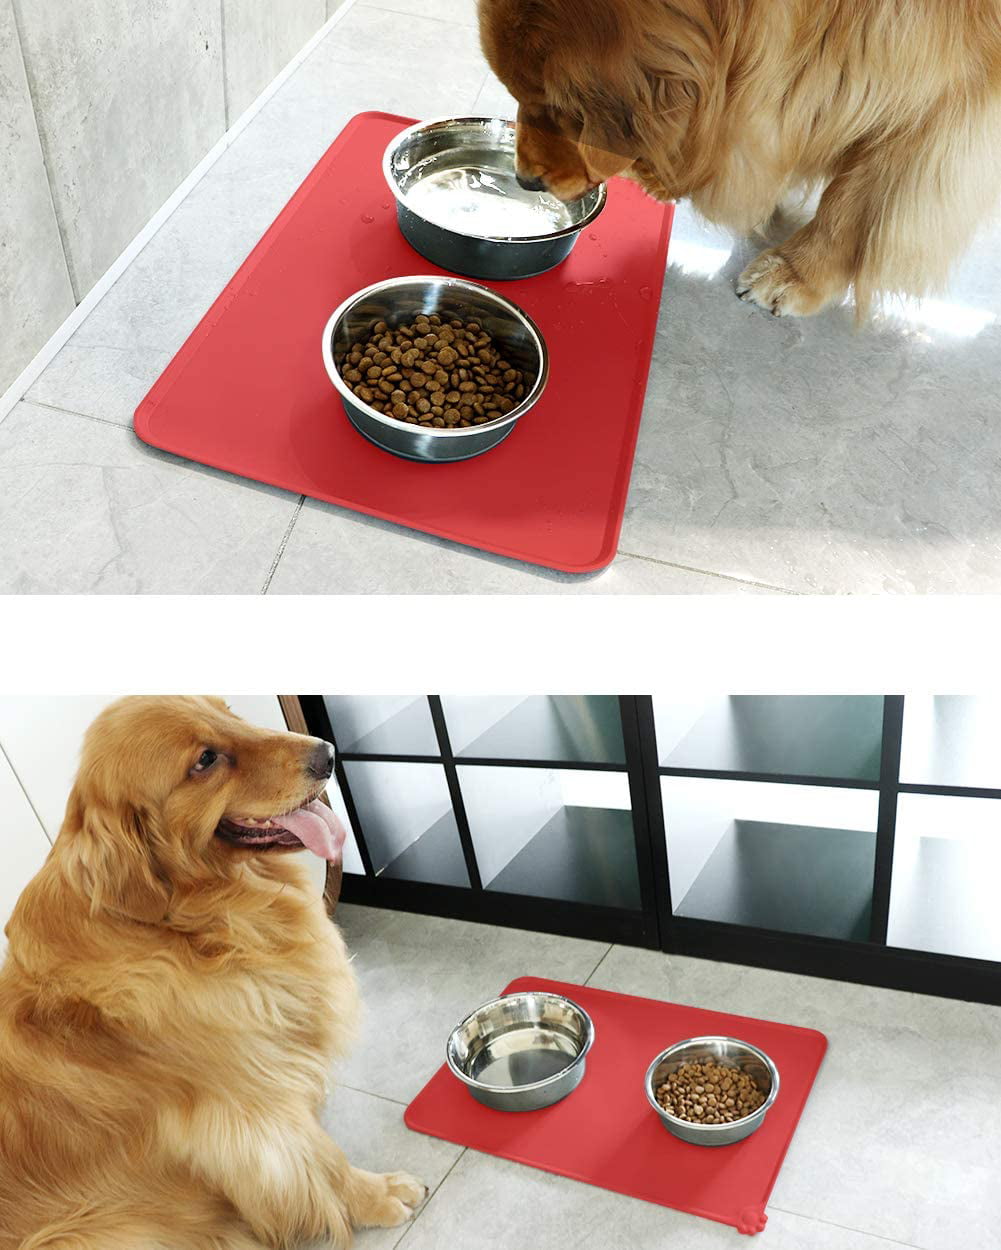 GetUSCart- Gorilla Grip Silicone Pet Feeding Mat, Easy Clean, Large,  18.5x11.5, Waterproof, Dishwasher Safe Dog, Cat Mat, Raised Edges, Placemat  Tray to Stop Food Spills and Water Bowl Messes on Floor, Turquoise